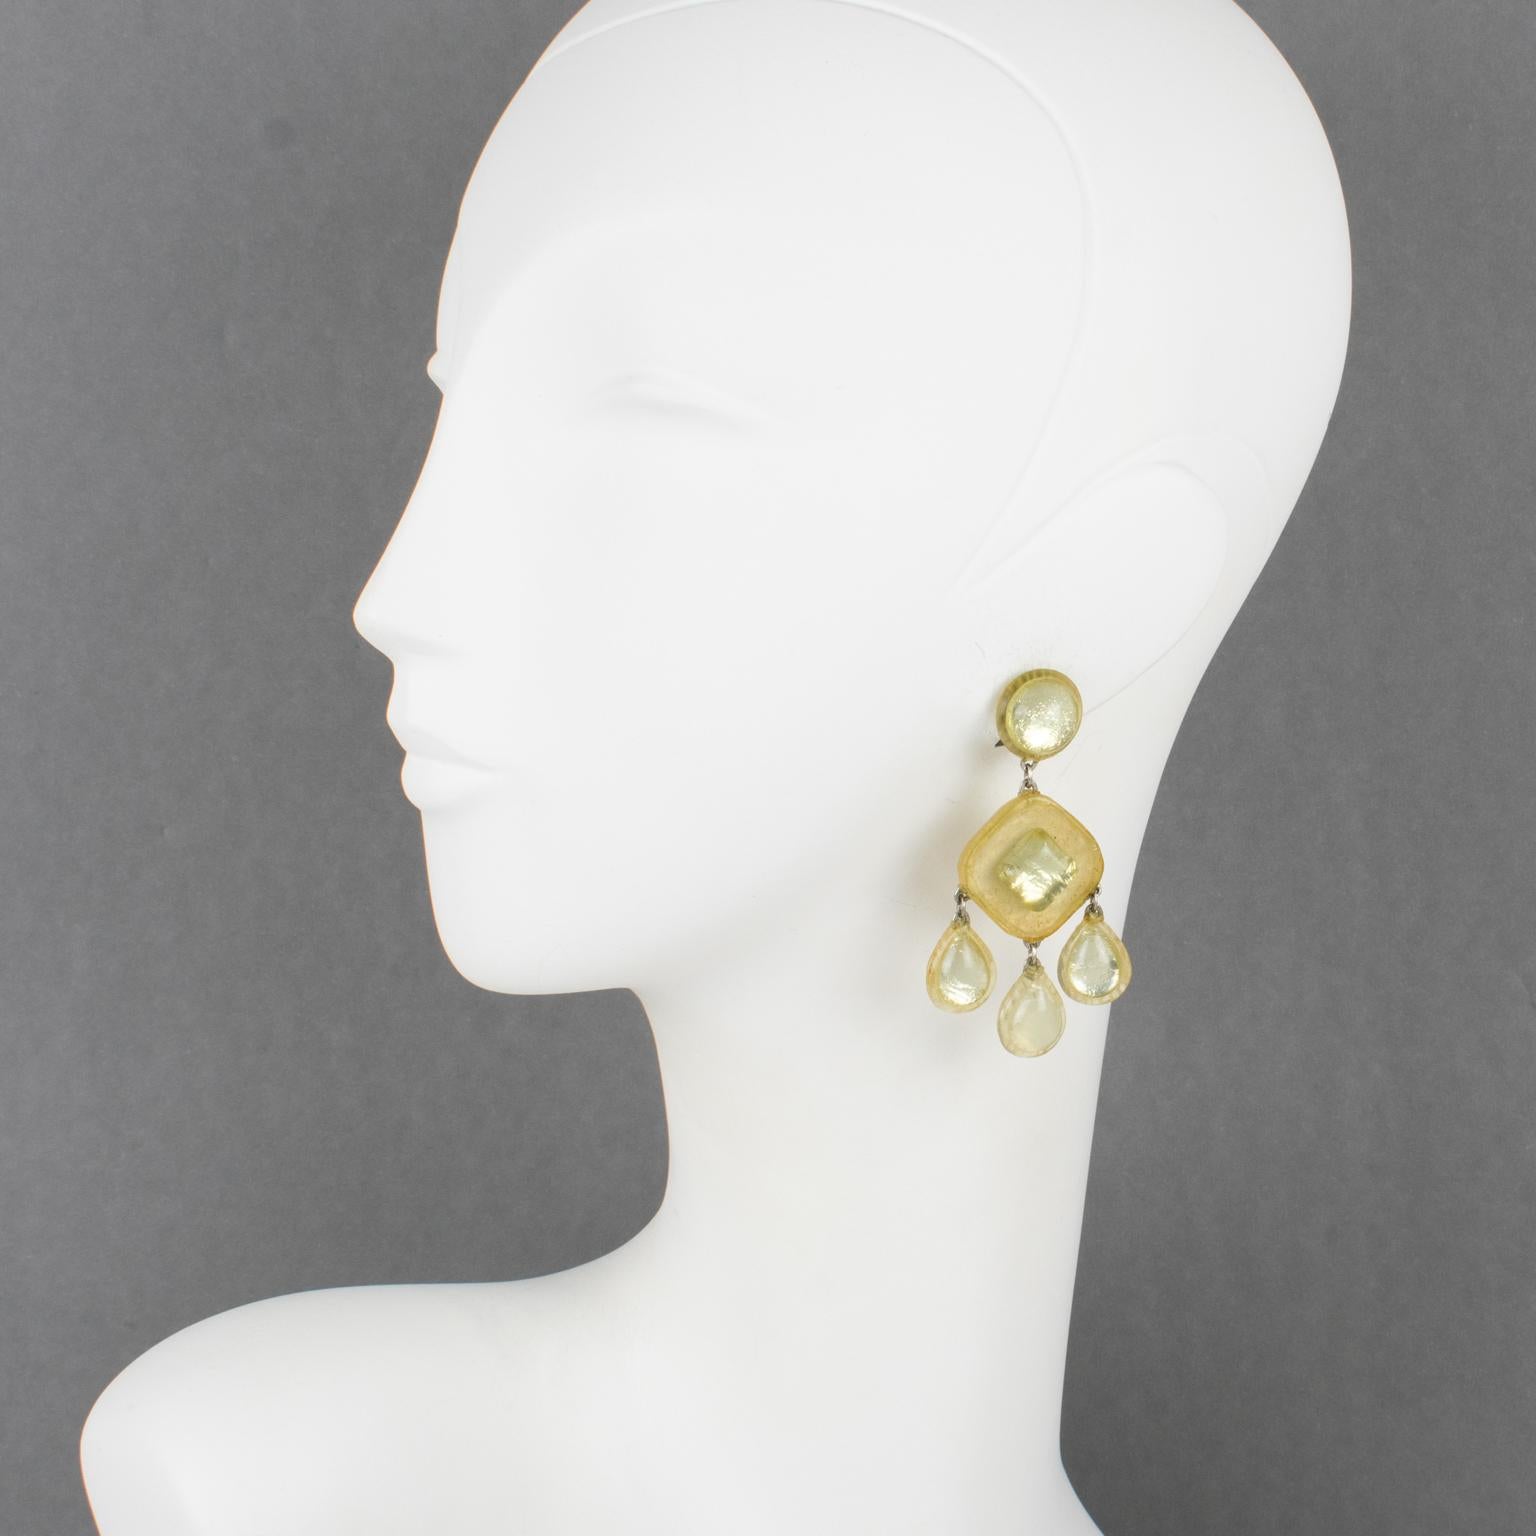 Refined Monique Vedie Talosel or resin clip-on earrings. They feature a geometric dangling shape with frosted and mirrored textured patterns in pale yellow color. The fastening clips at the back are marked 